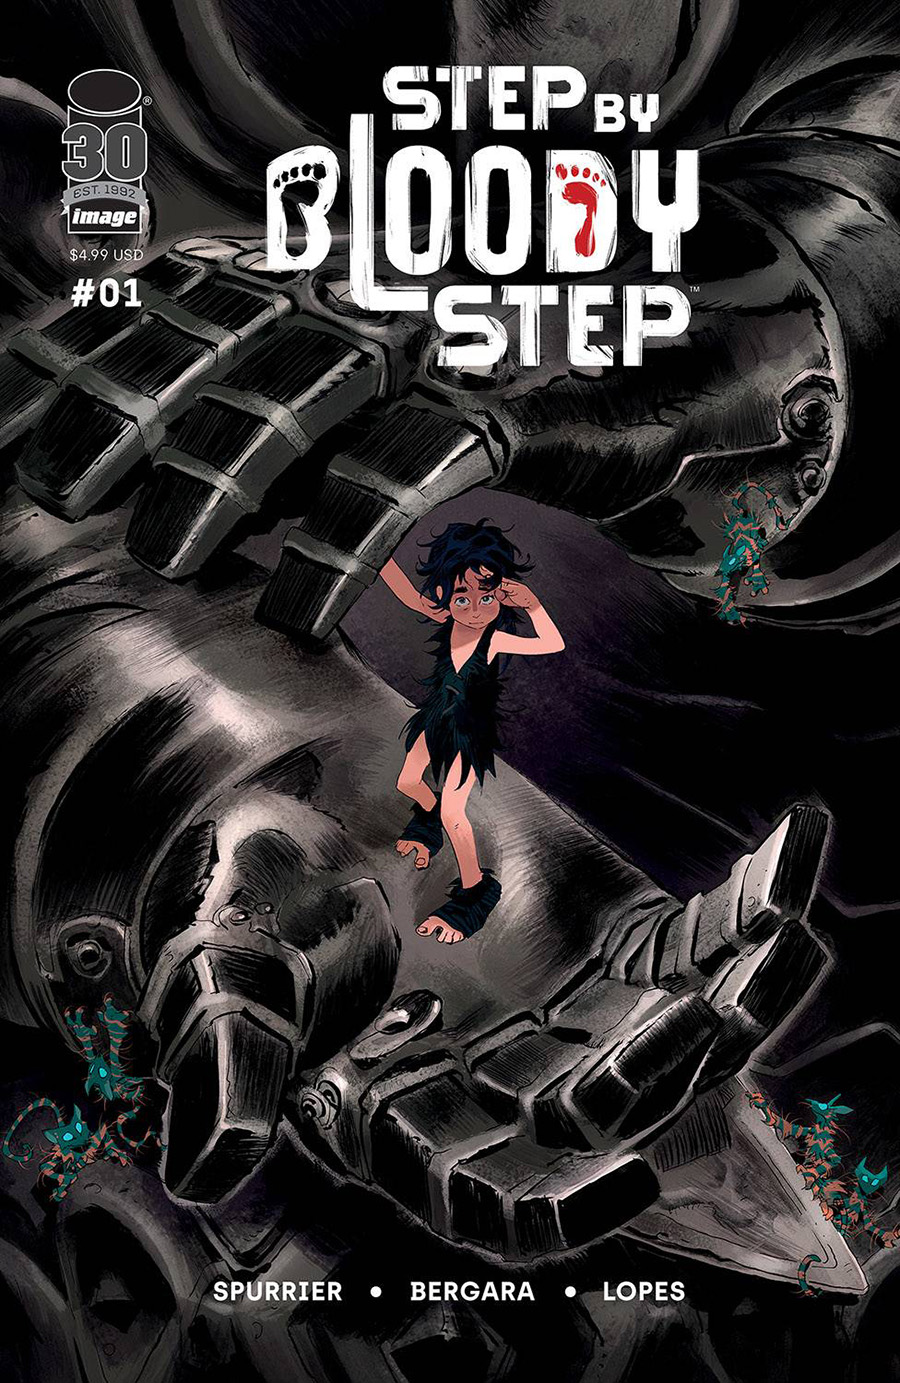 Comic Collection: Step By Bloody Step #1 - #4